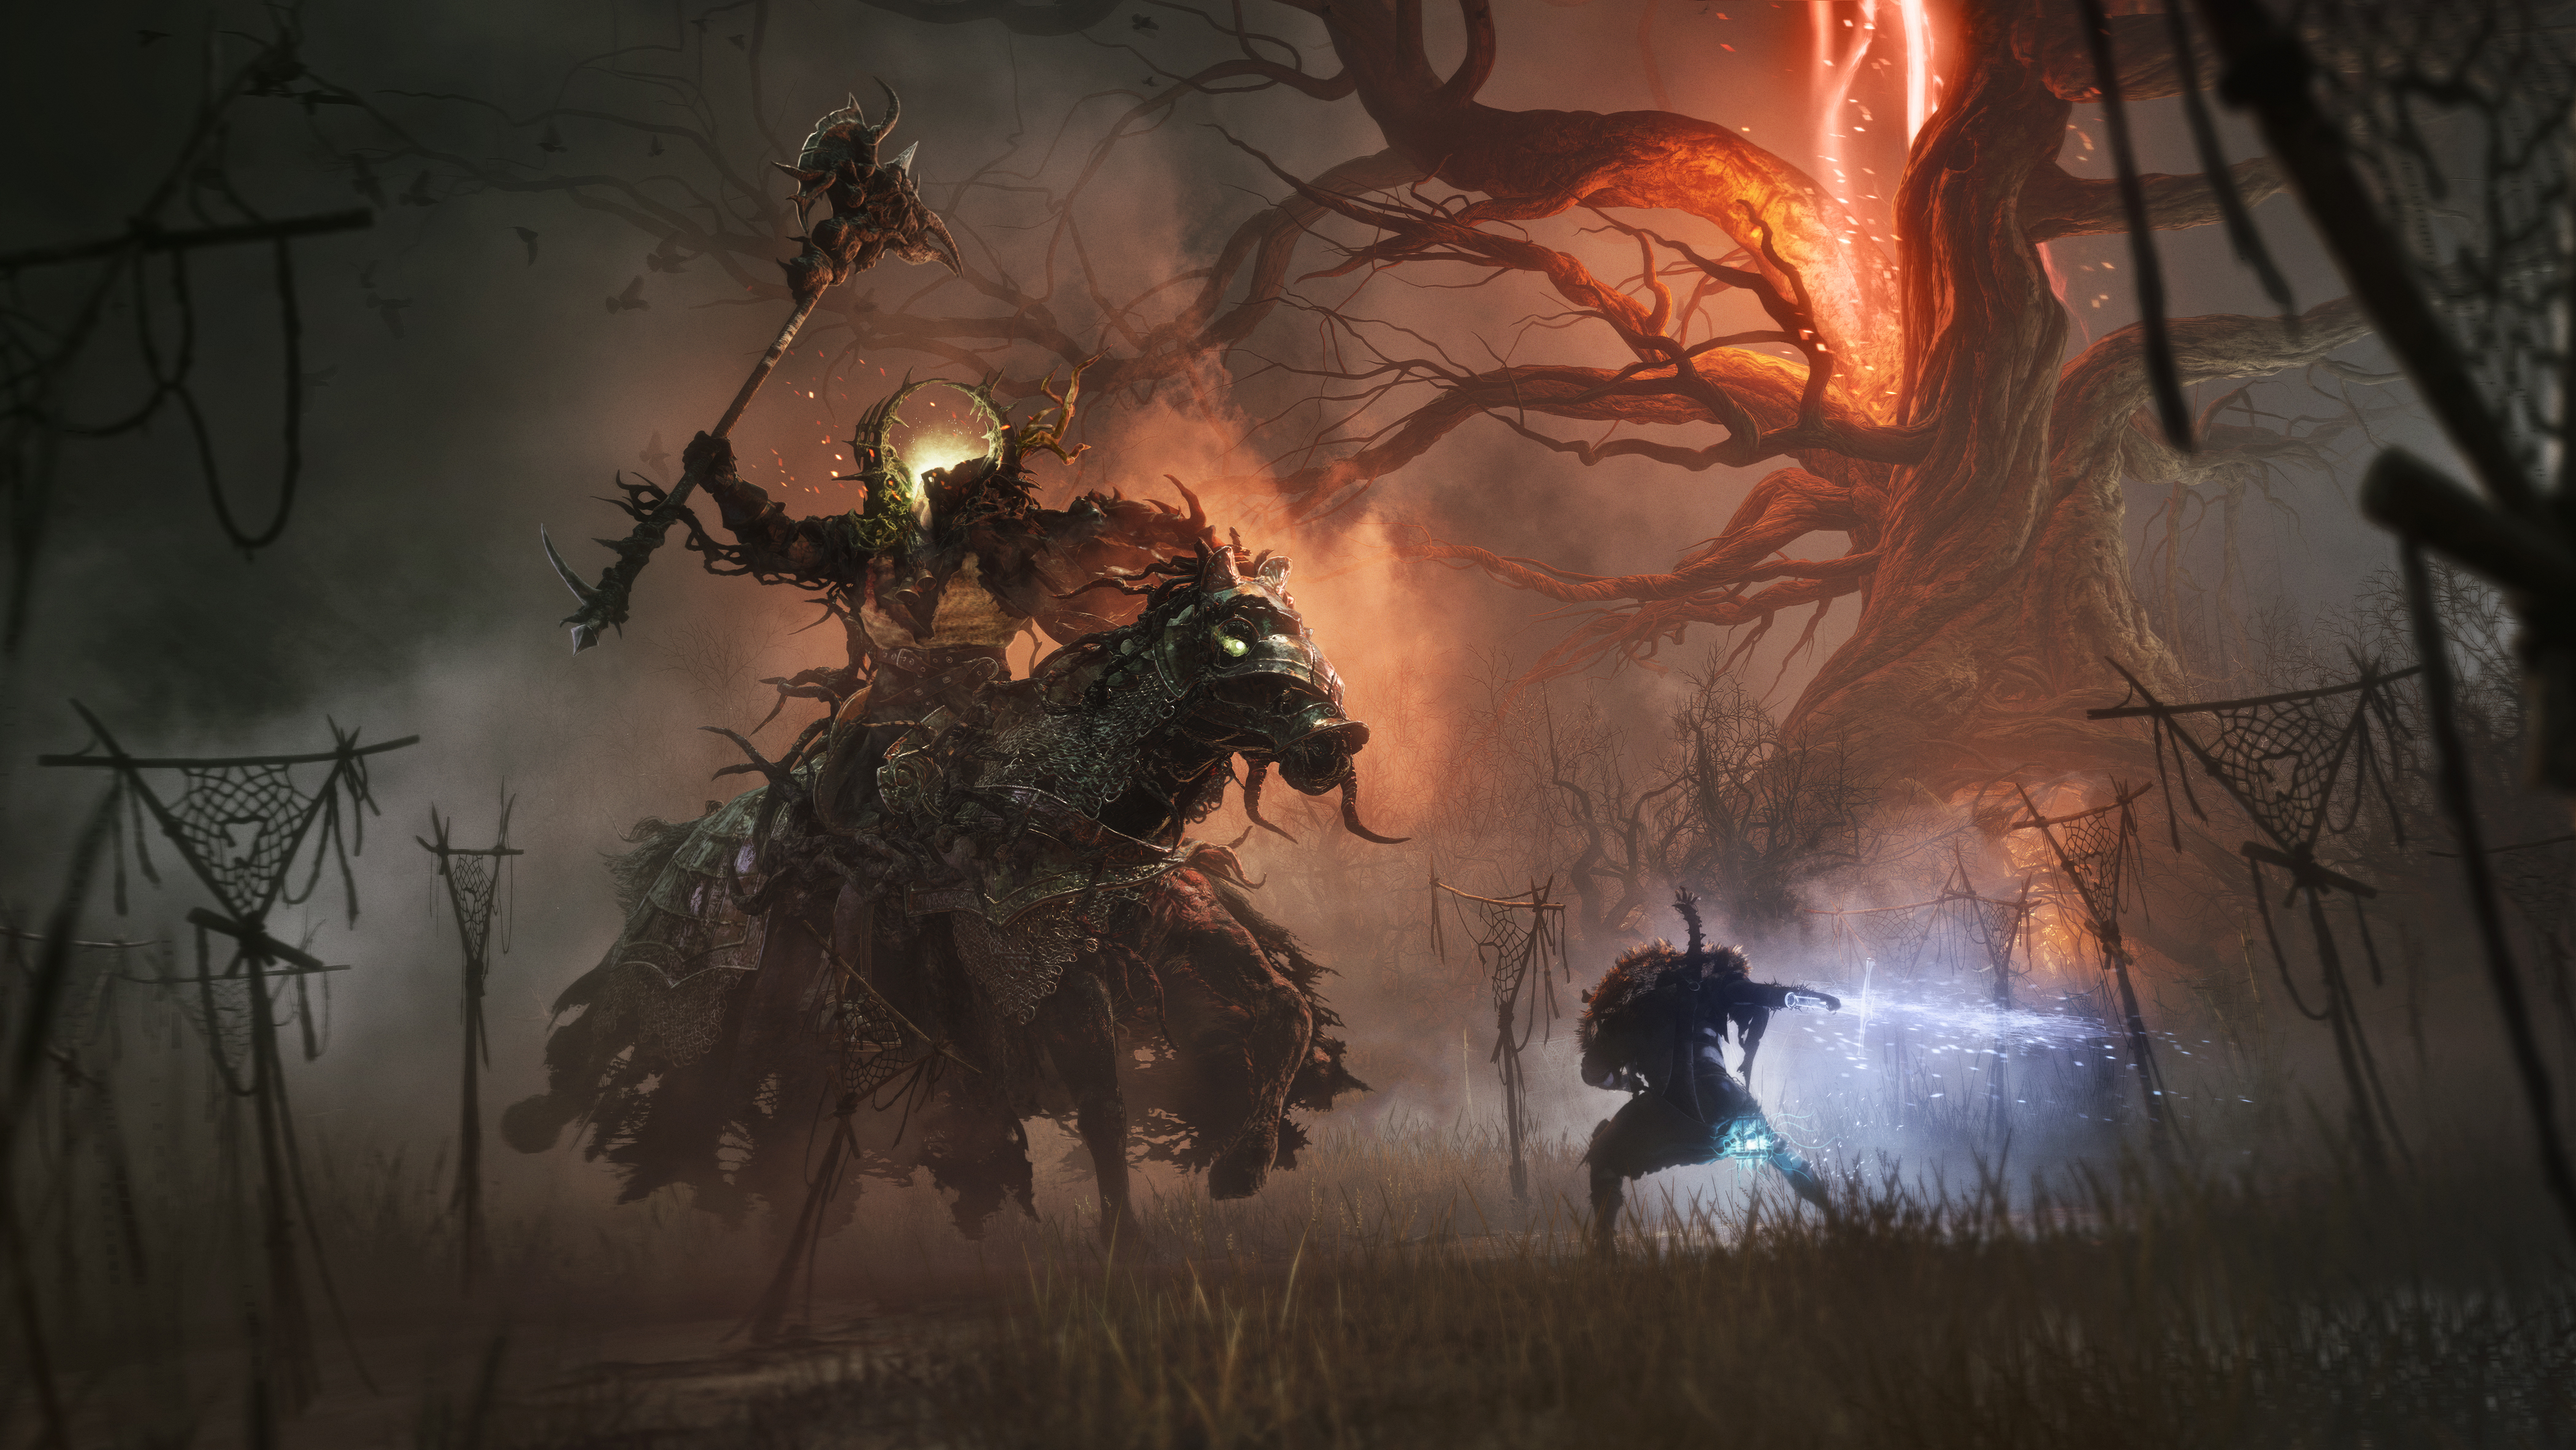 Lords of the Fallen gets a gothic and stunning launch trailer